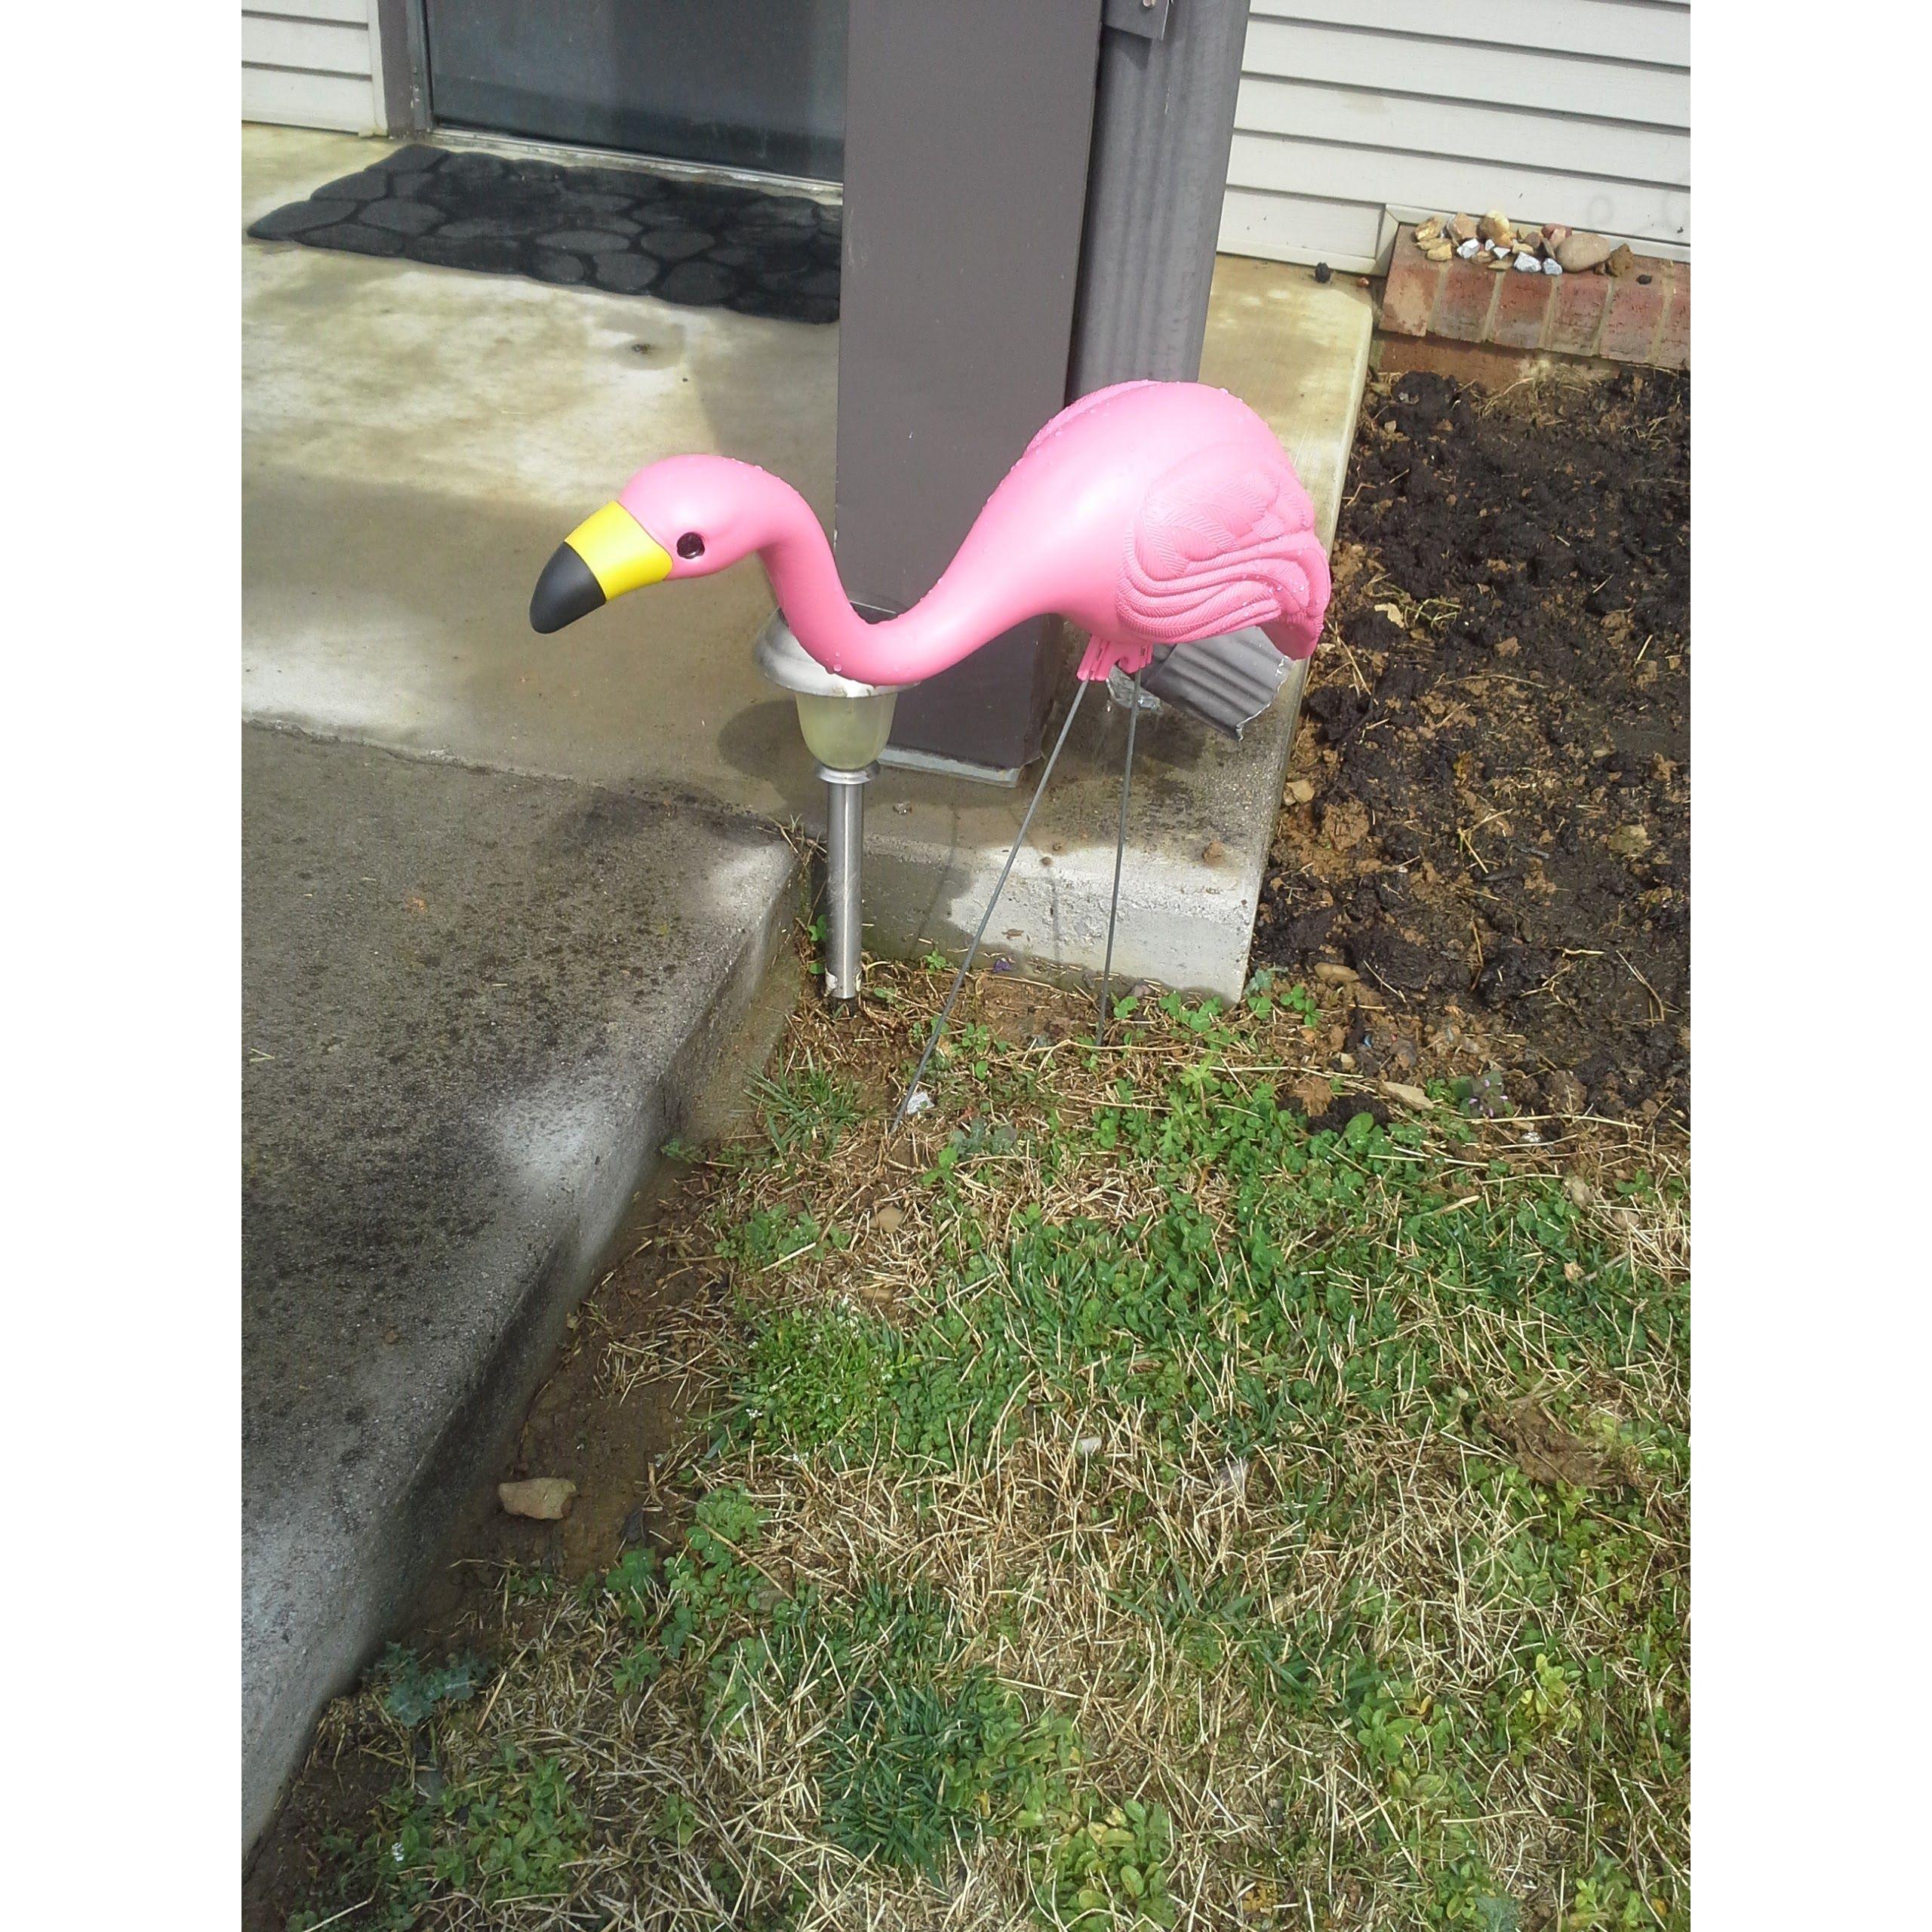 The first flamingo